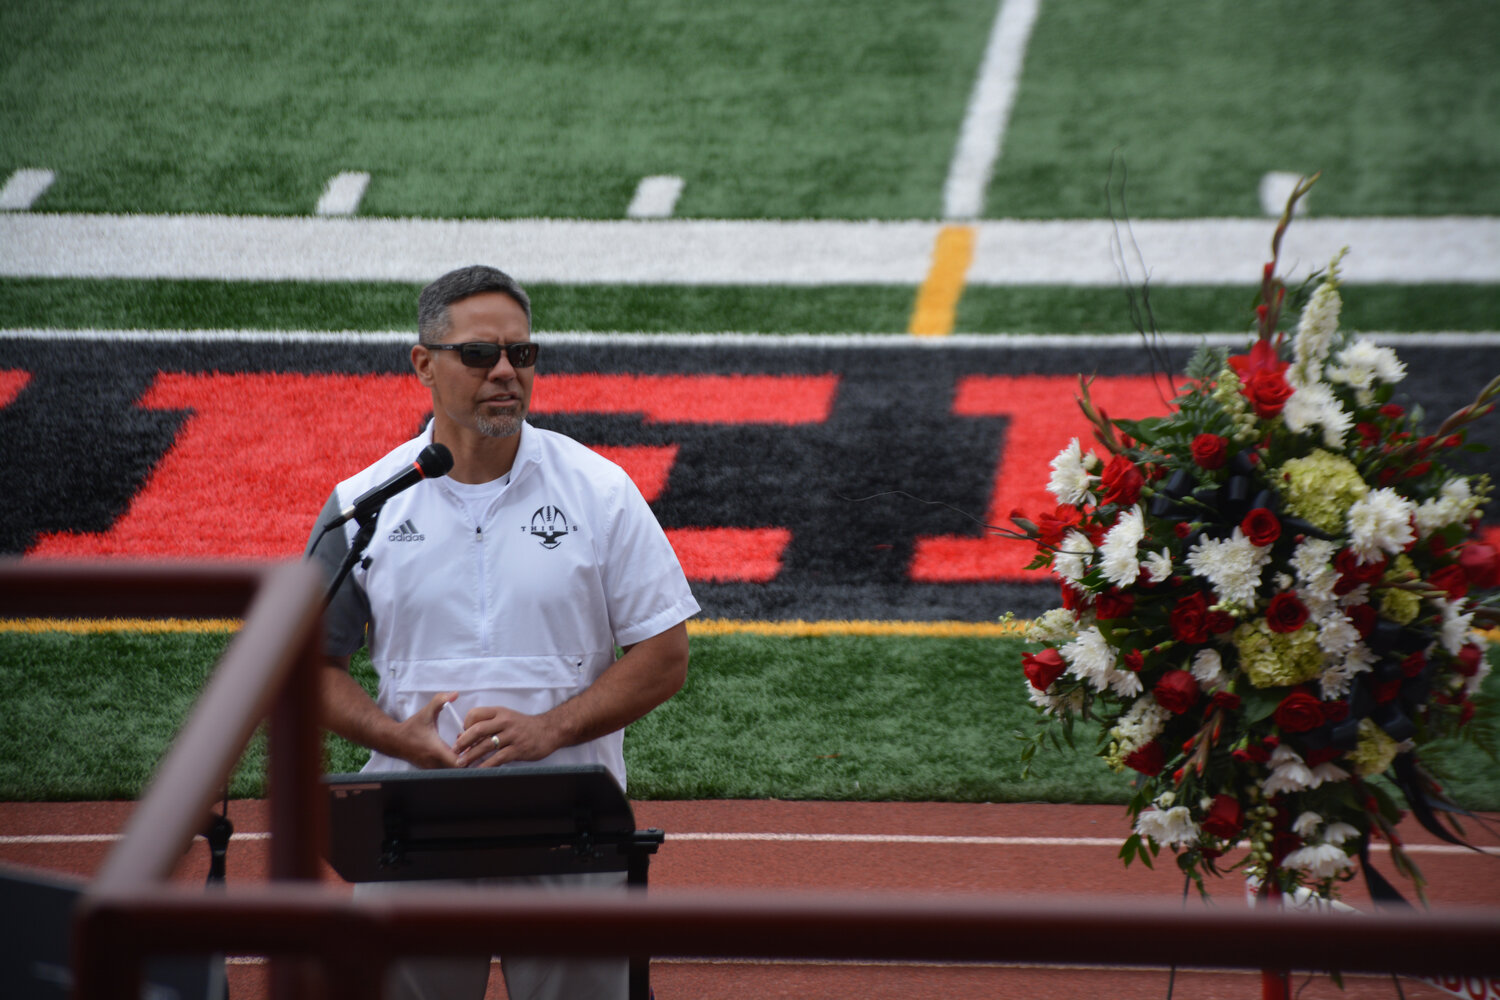 Jason Ronquillo delivers a strong message of support at Shawn Jemtegaard’s memorial on May 21.